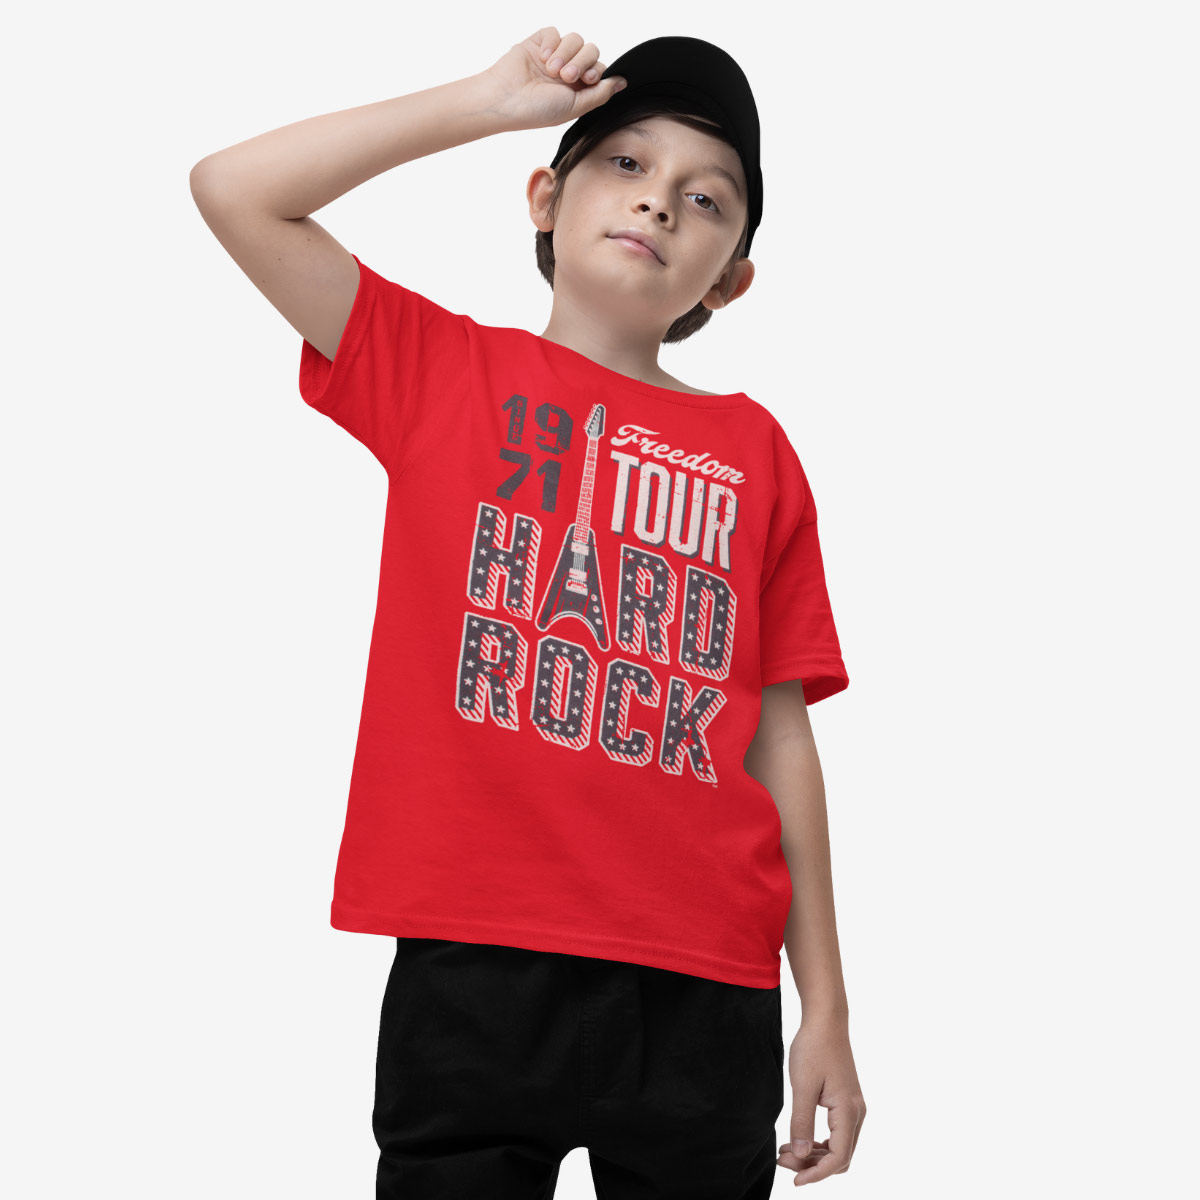 Americana Youth Fit Red Tee with Freedom Tour Motif image number 1